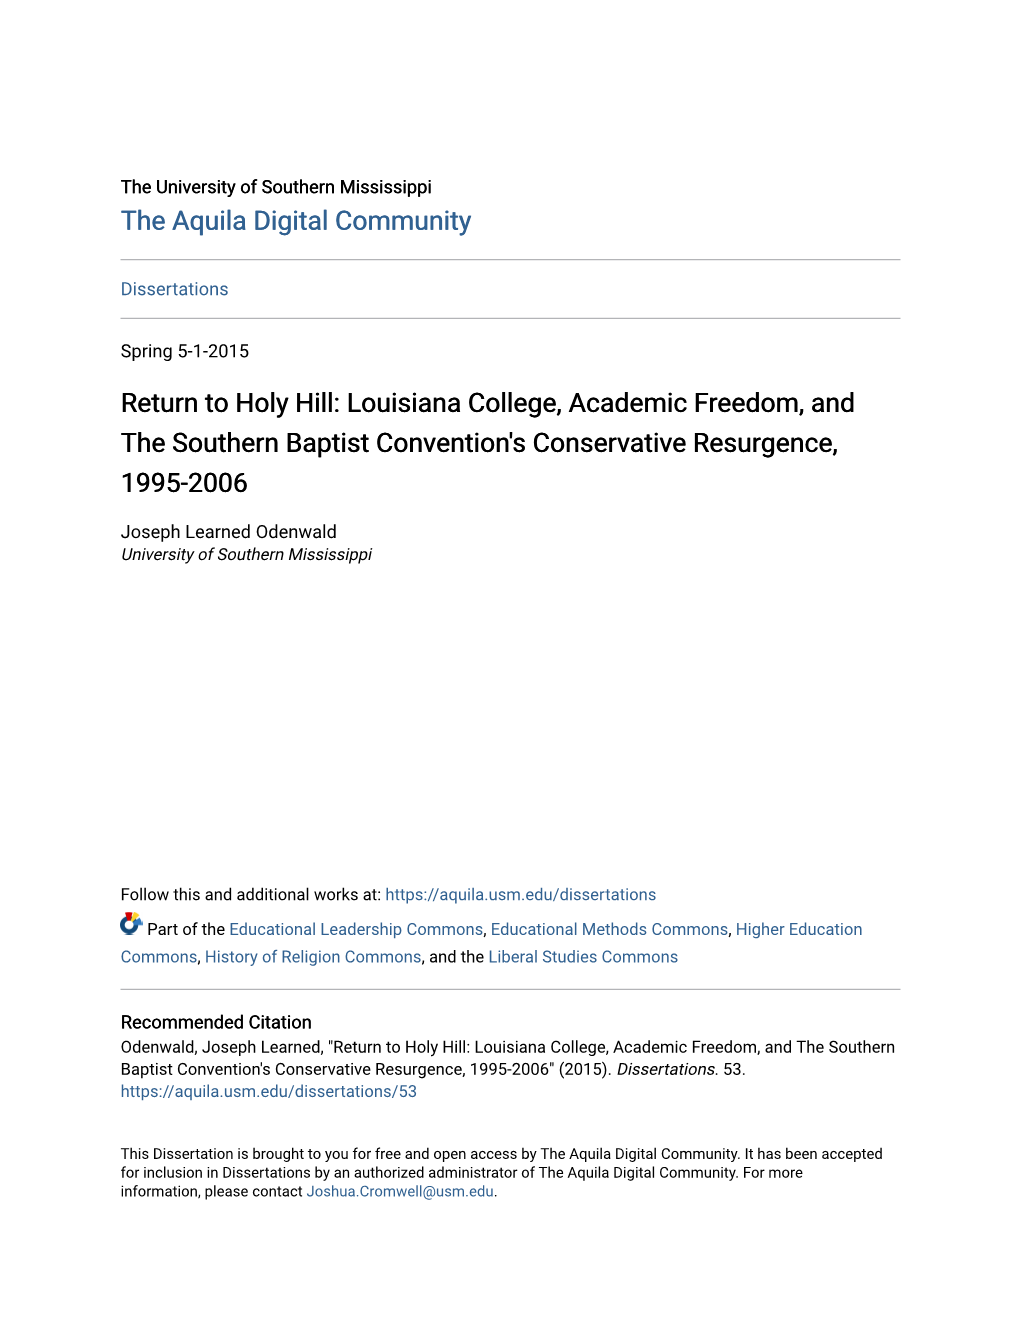 Holy Hill: Louisiana College, Academic Freedom, and the Southern Baptist Convention's Conservative Resurgence, 1995-2006